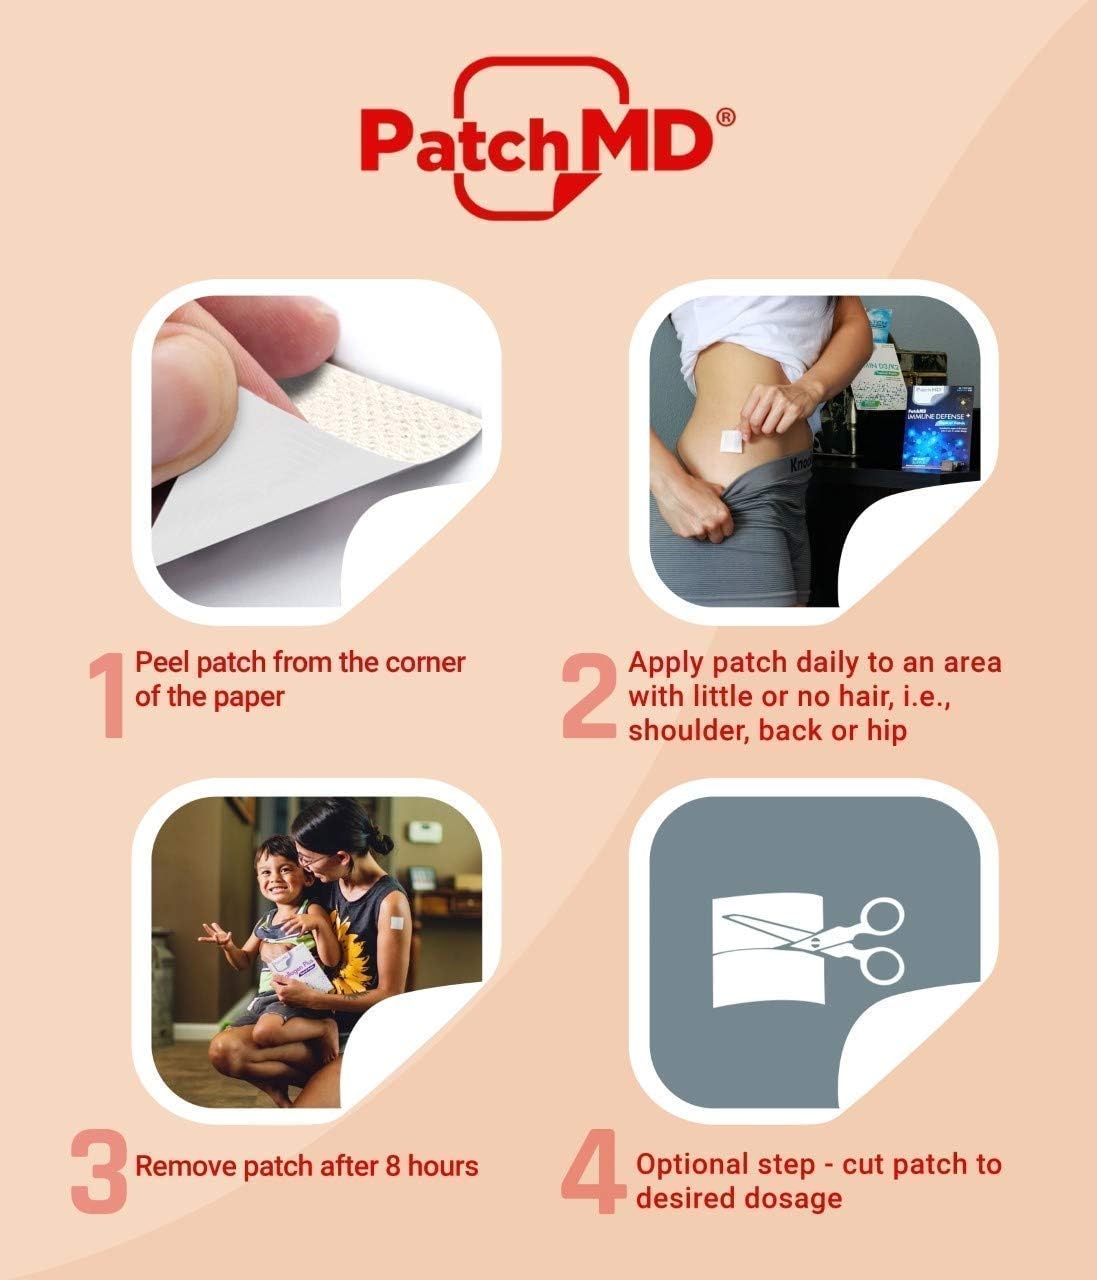 PatchMD - Keep Klear Acne Prevention Patch, 30 Day Supply